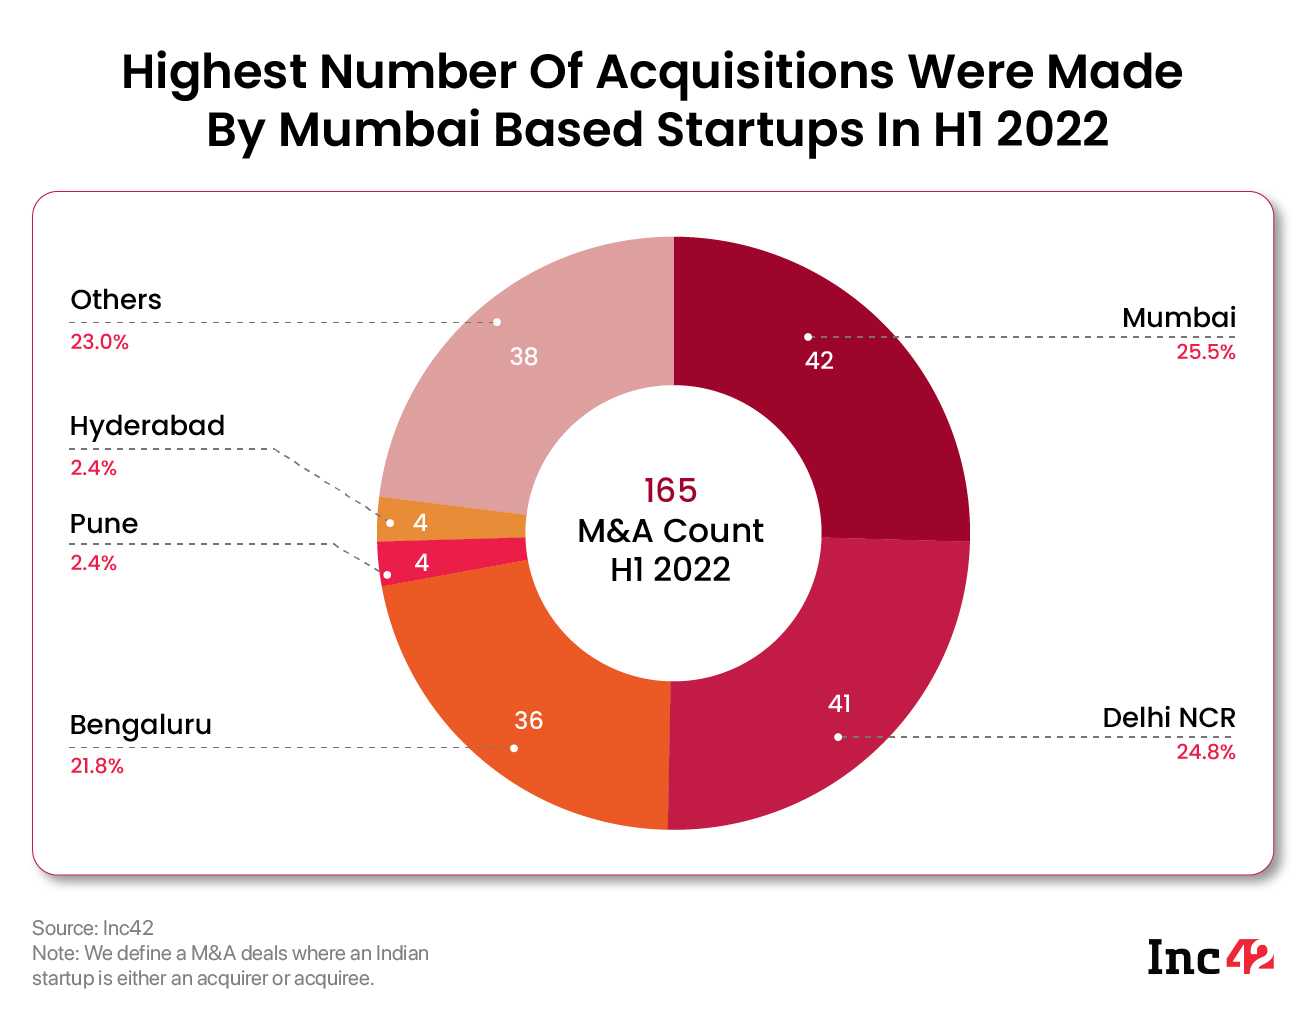 Mumbai-based startups made the most M&A deals in H1 2022